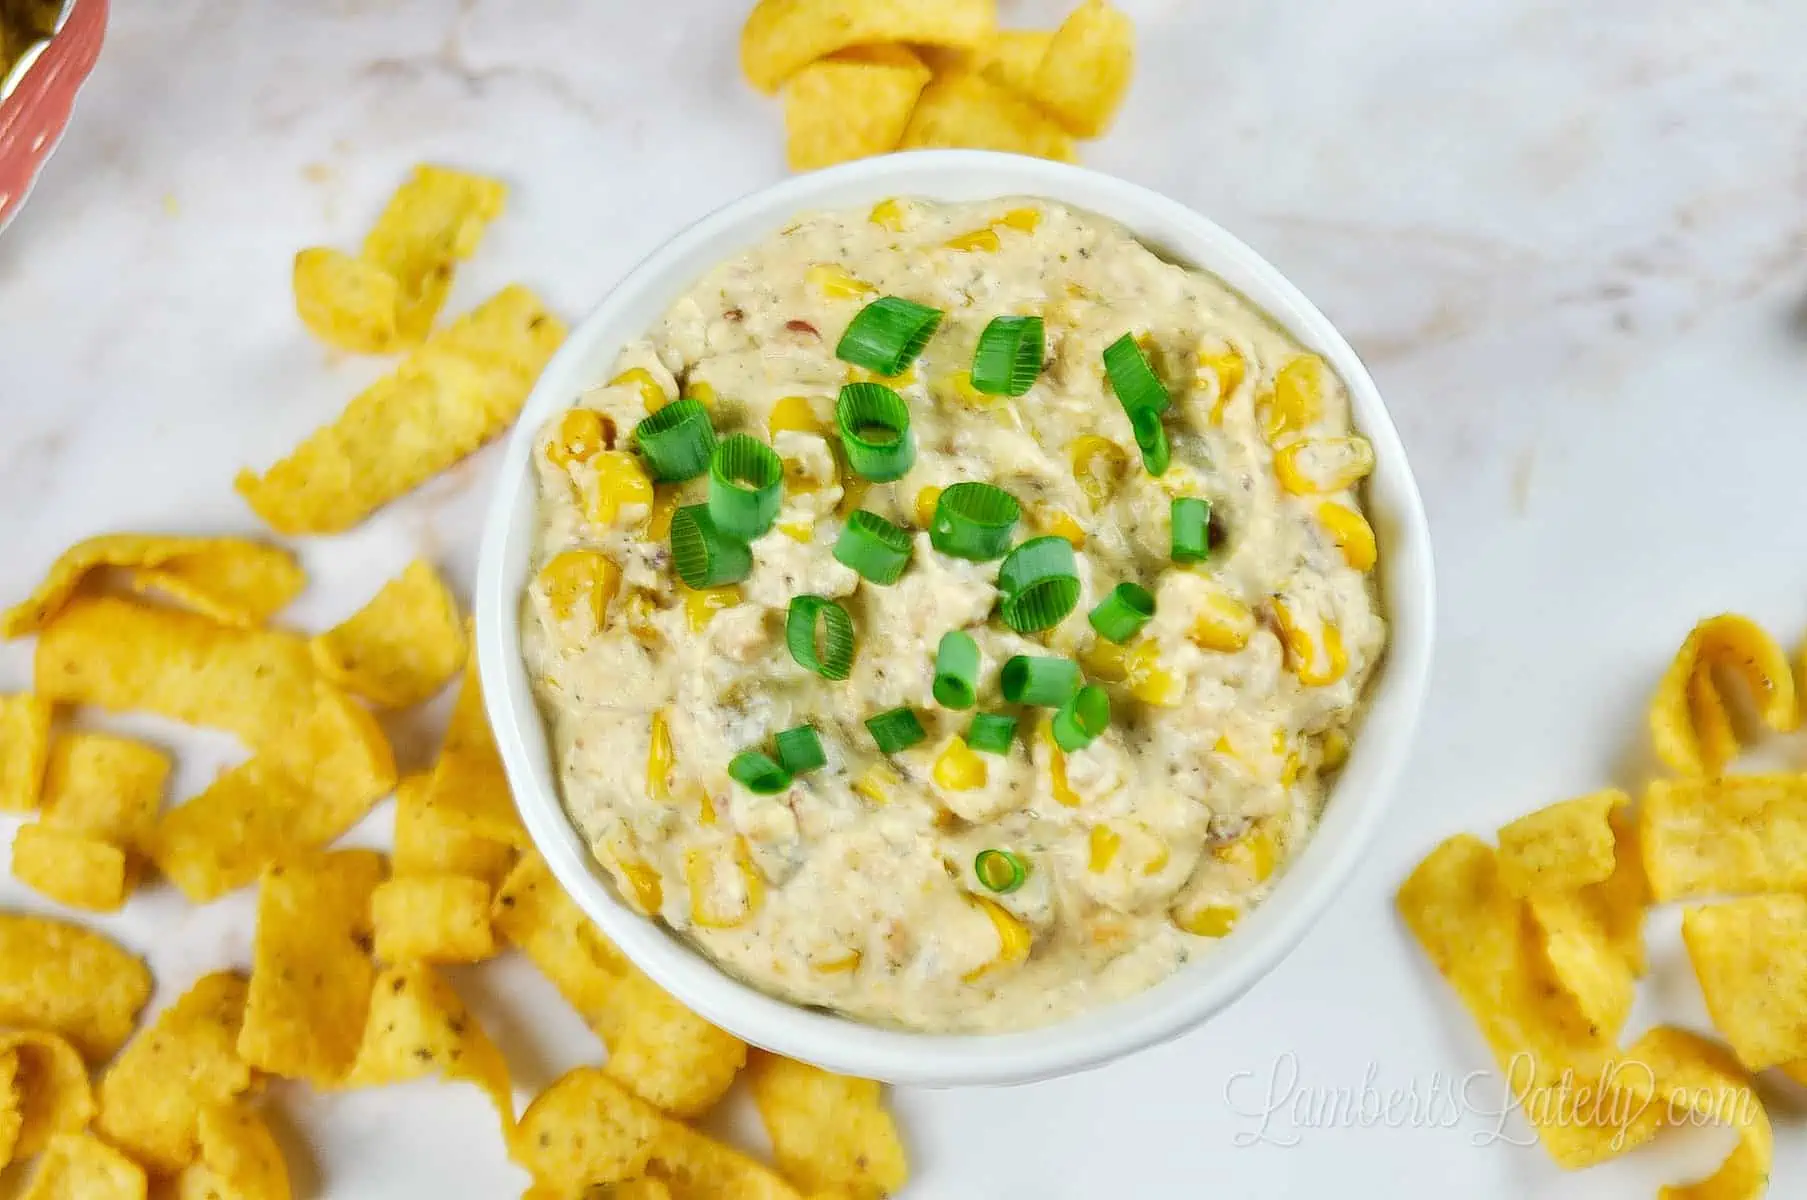 corn dip topped with green onions.